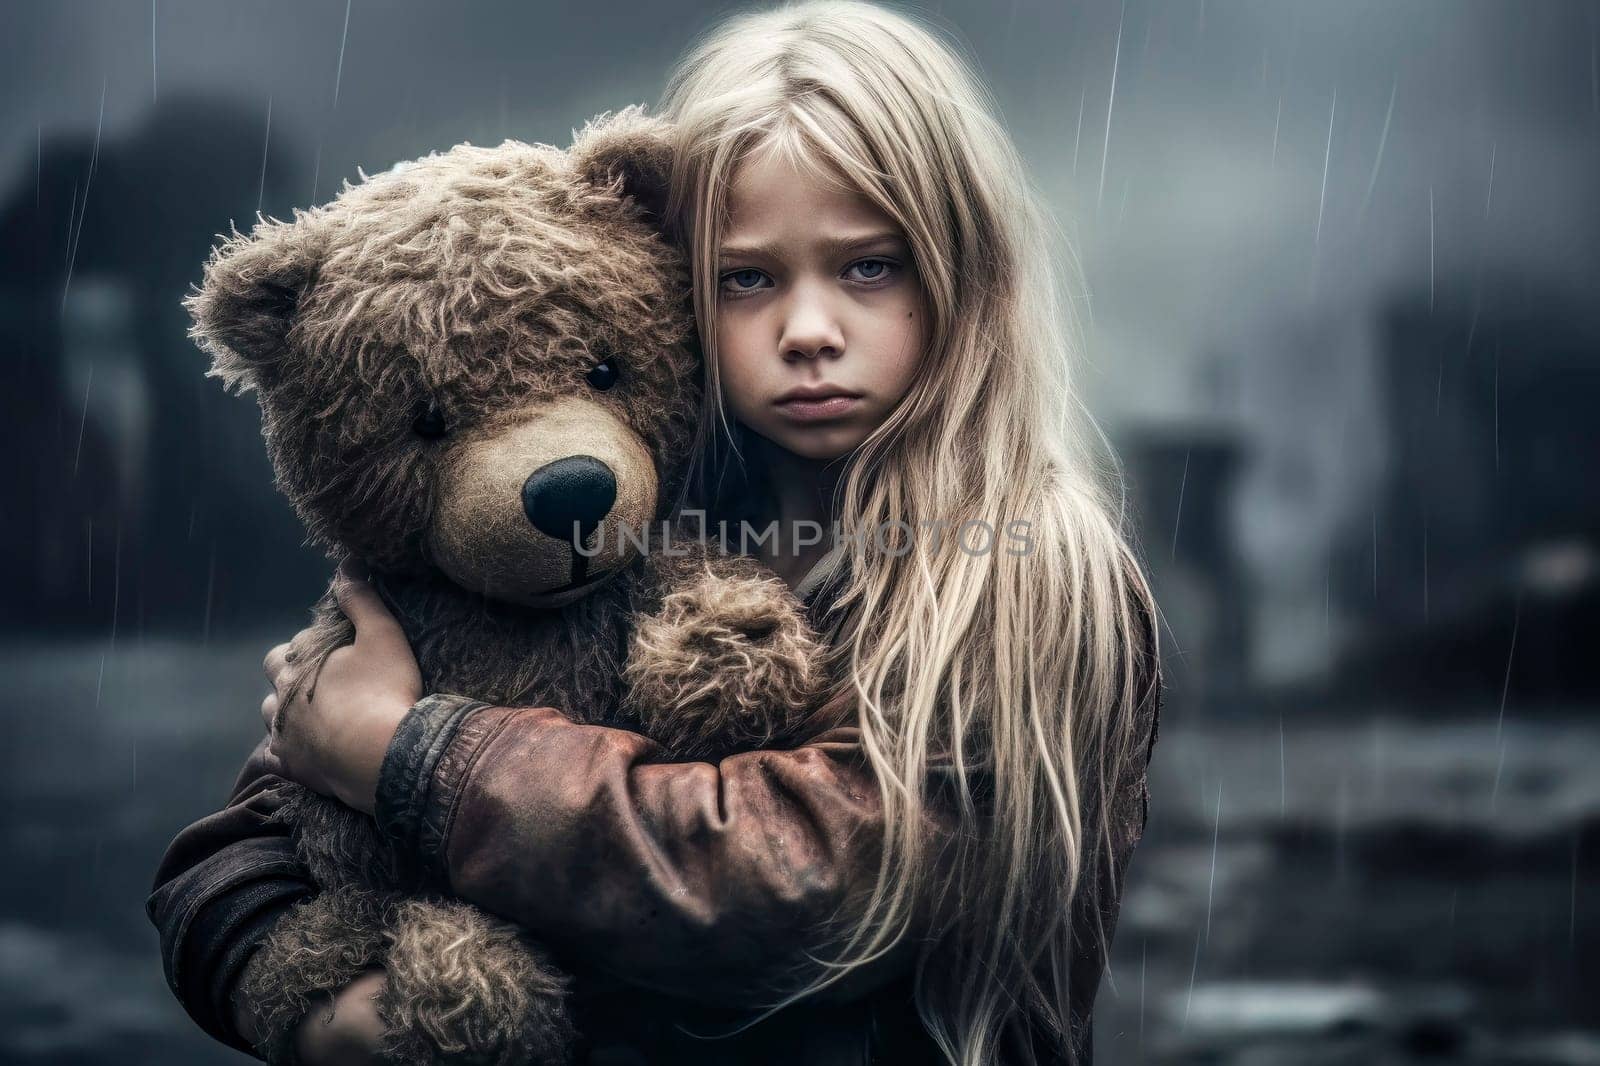 Seeking Comfort: Girl Embracing Teddy Bear for Solace by pippocarlot